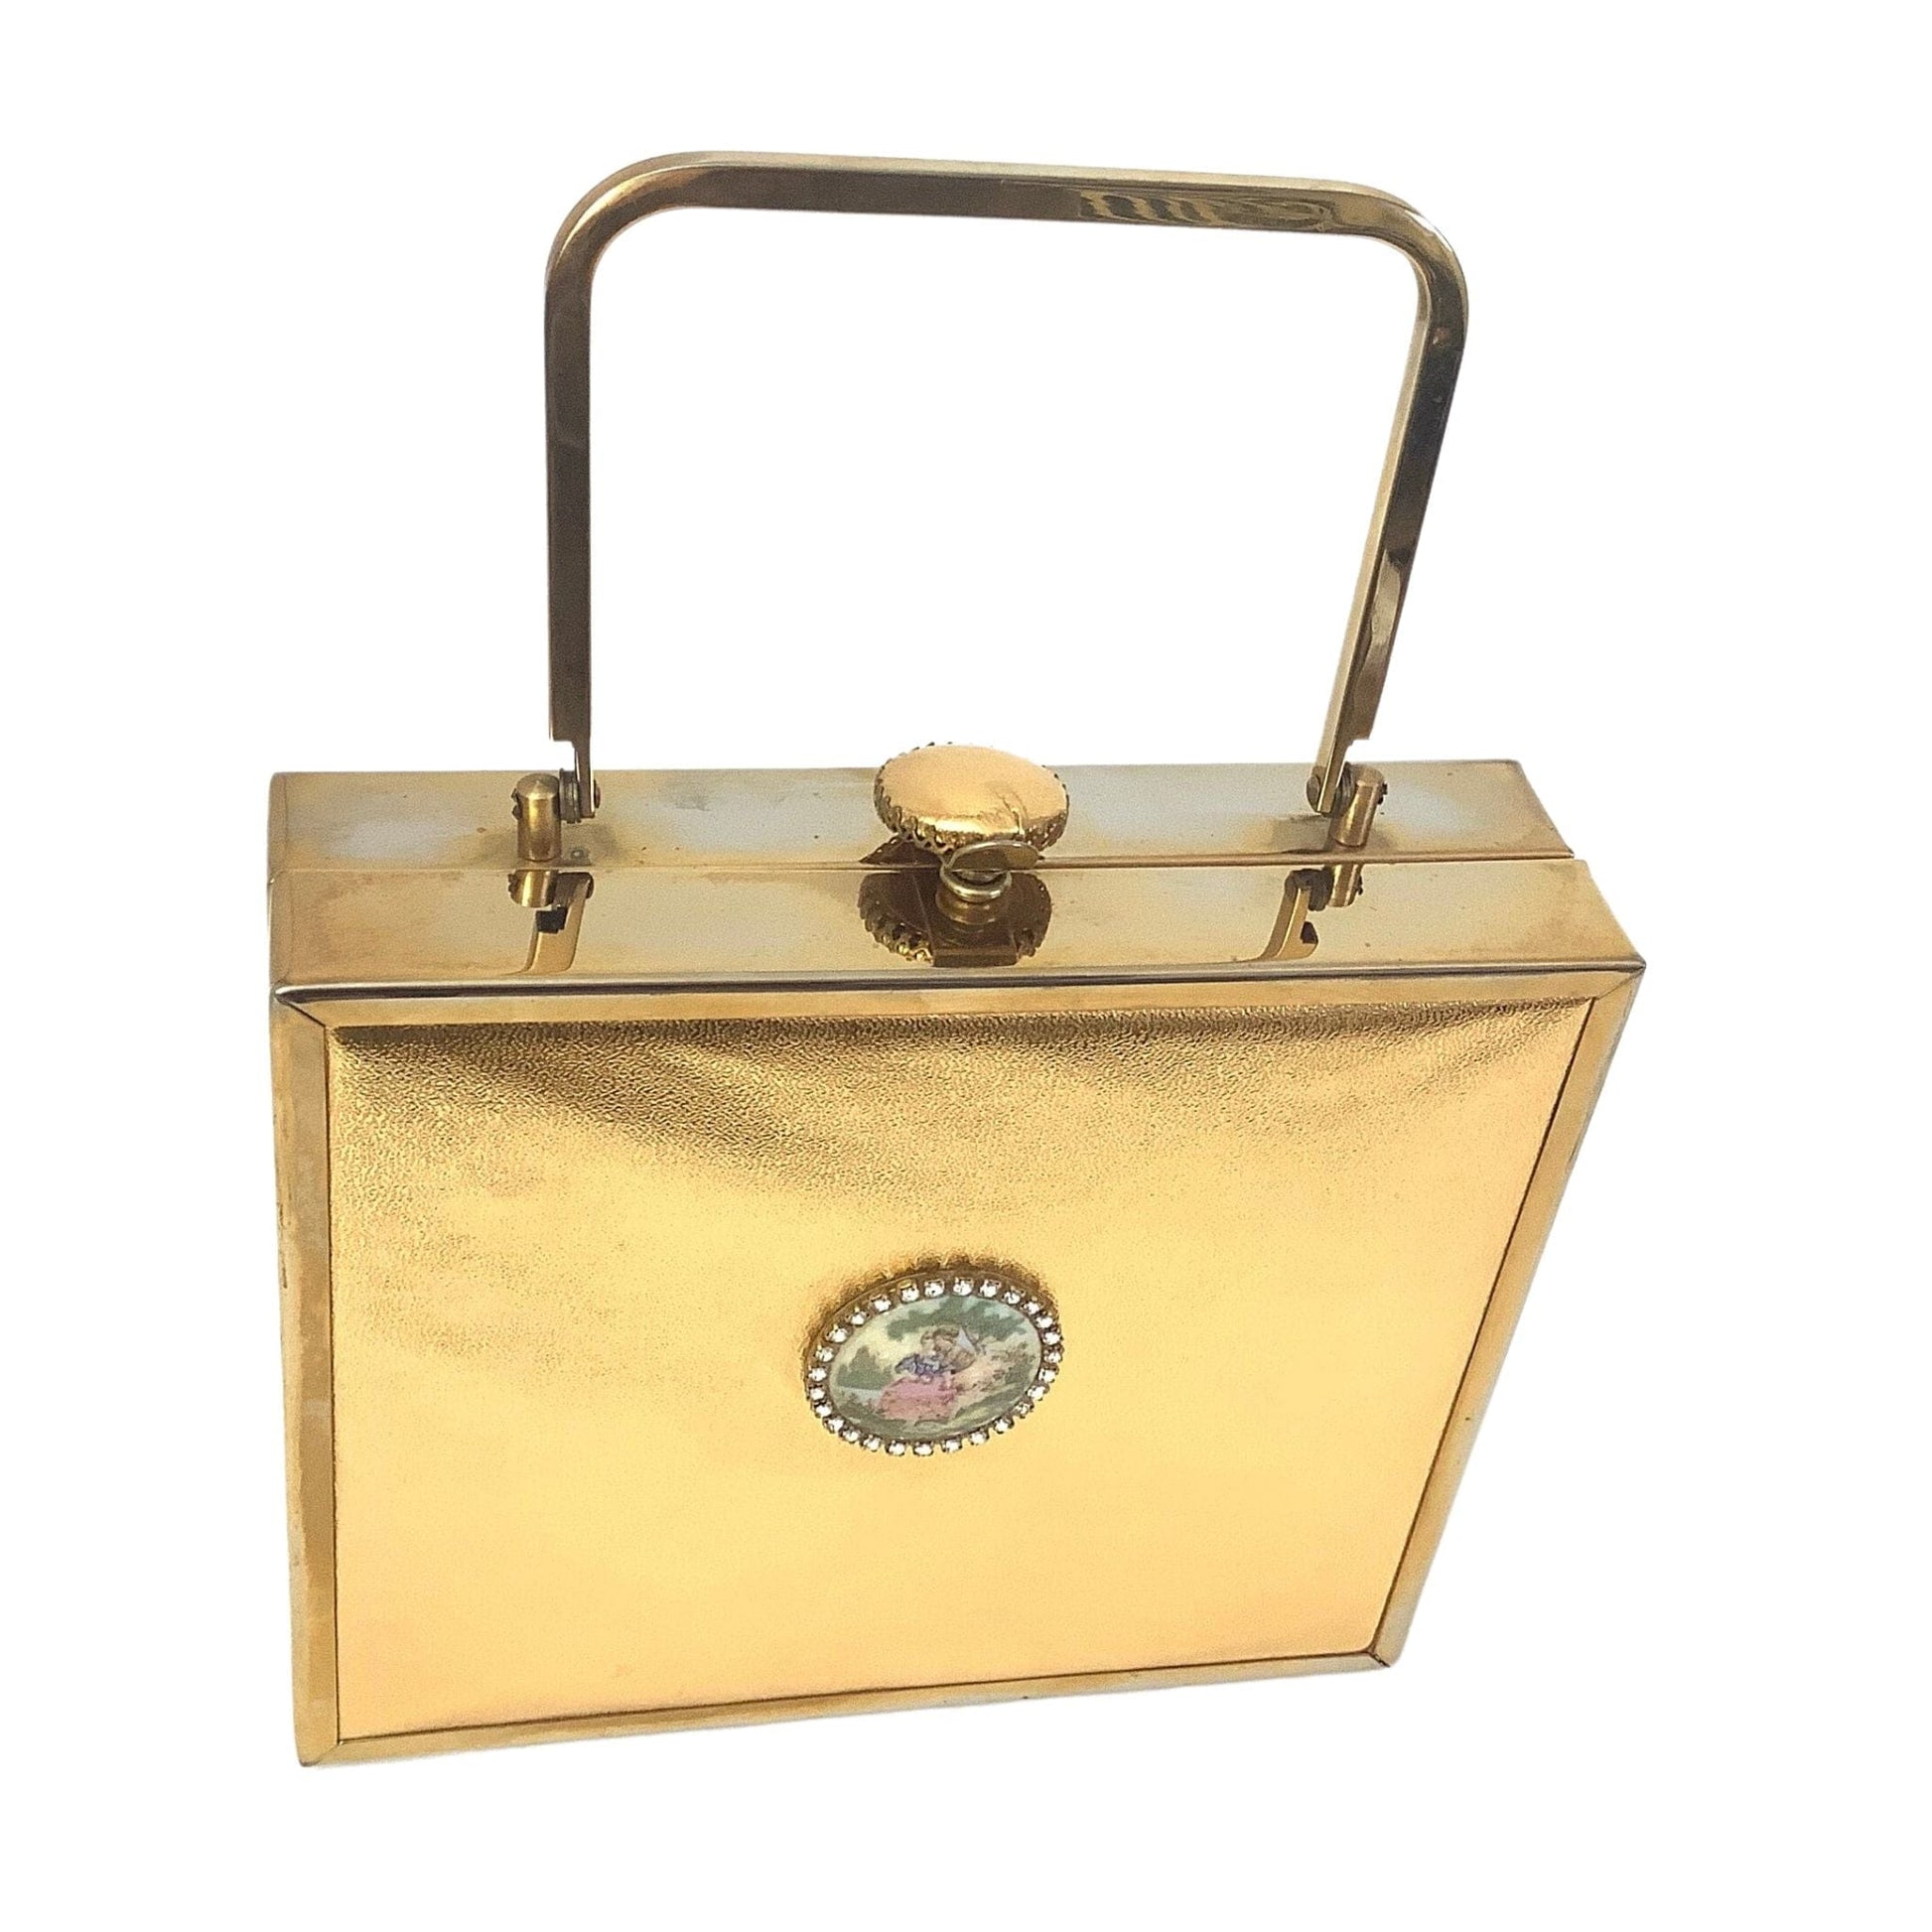 Tyrolean Gold Purse Gold / Man Made / Vintage 1960s